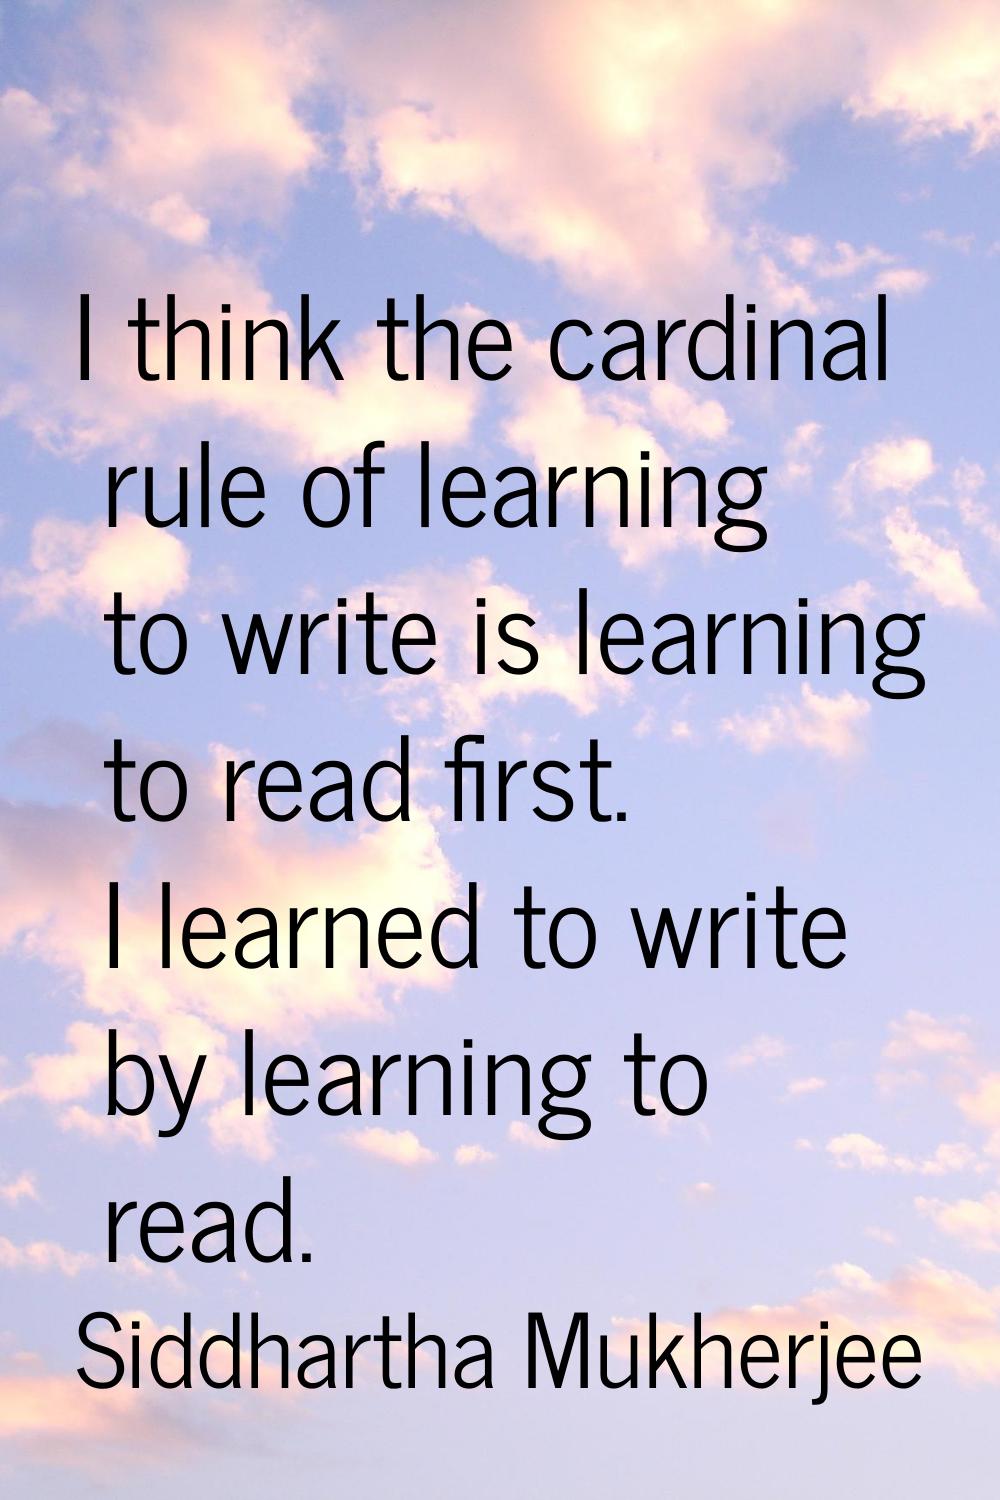 I think the cardinal rule of learning to write is learning to read first. I learned to write by lea